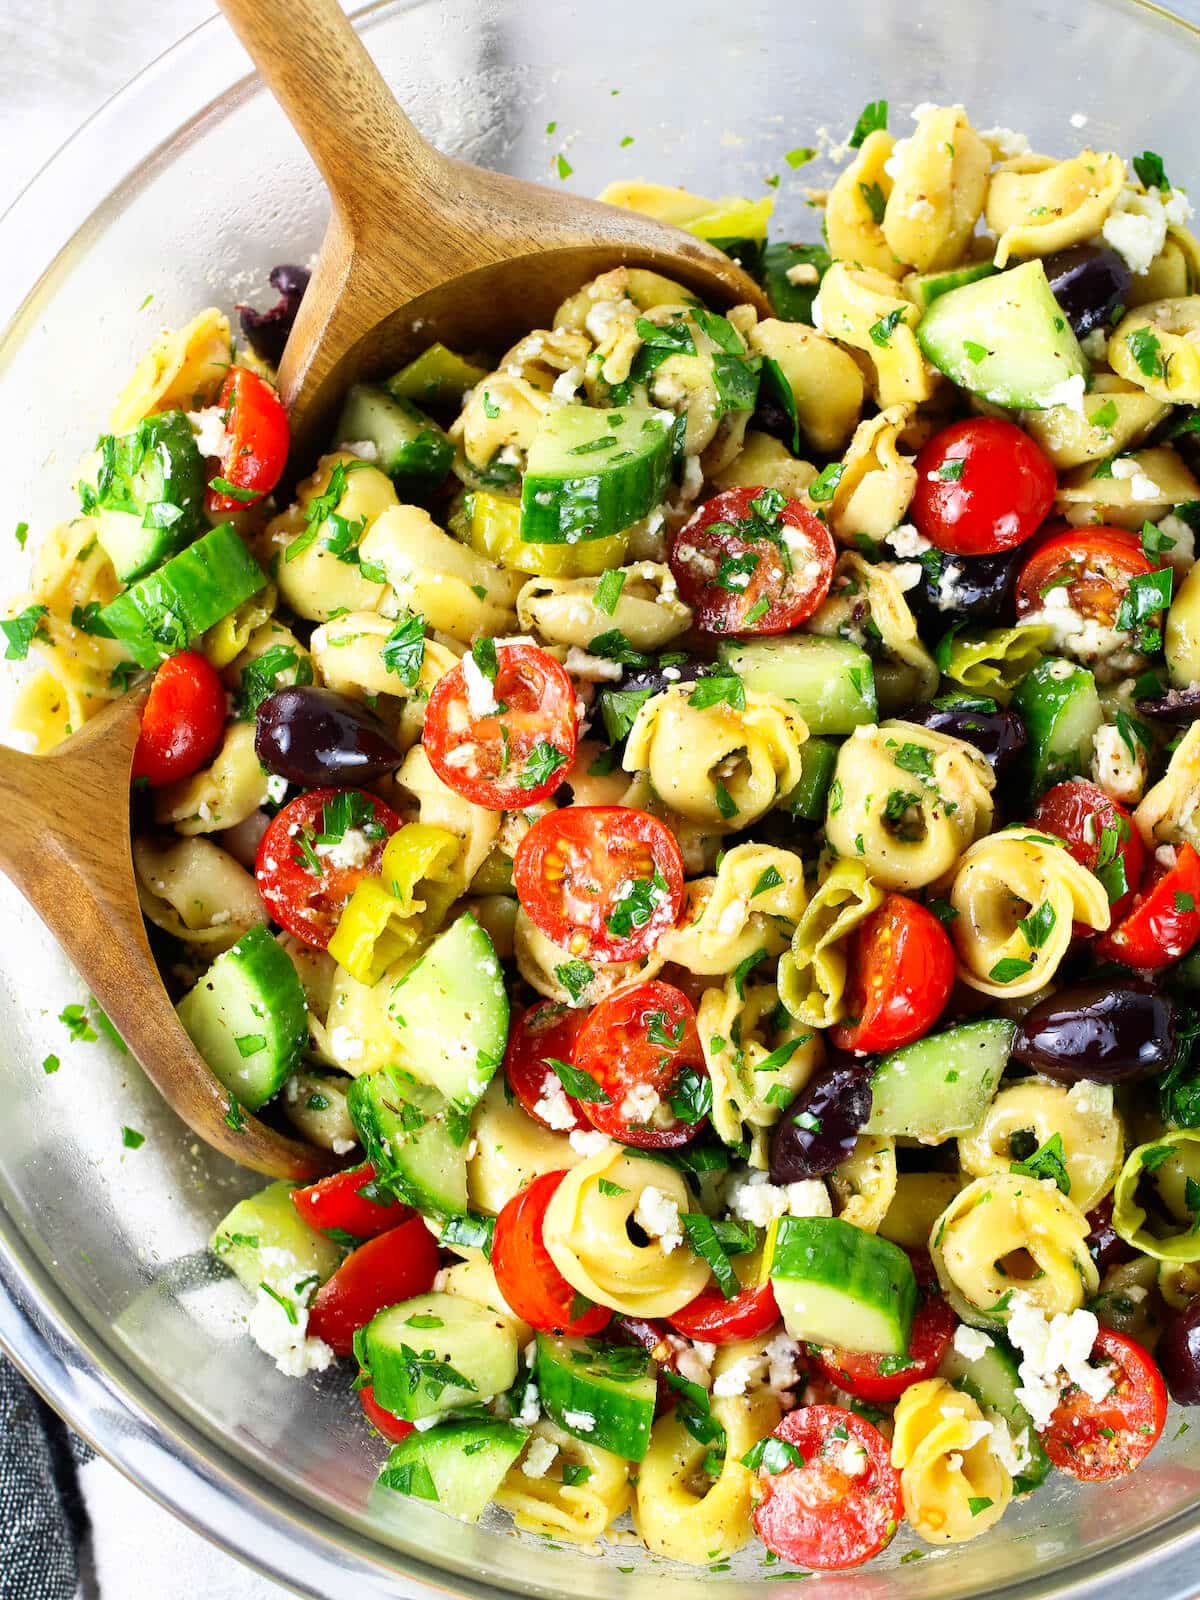 A large half bowl with serving utensils for this salad with pasta, veggies and Greek dressing.